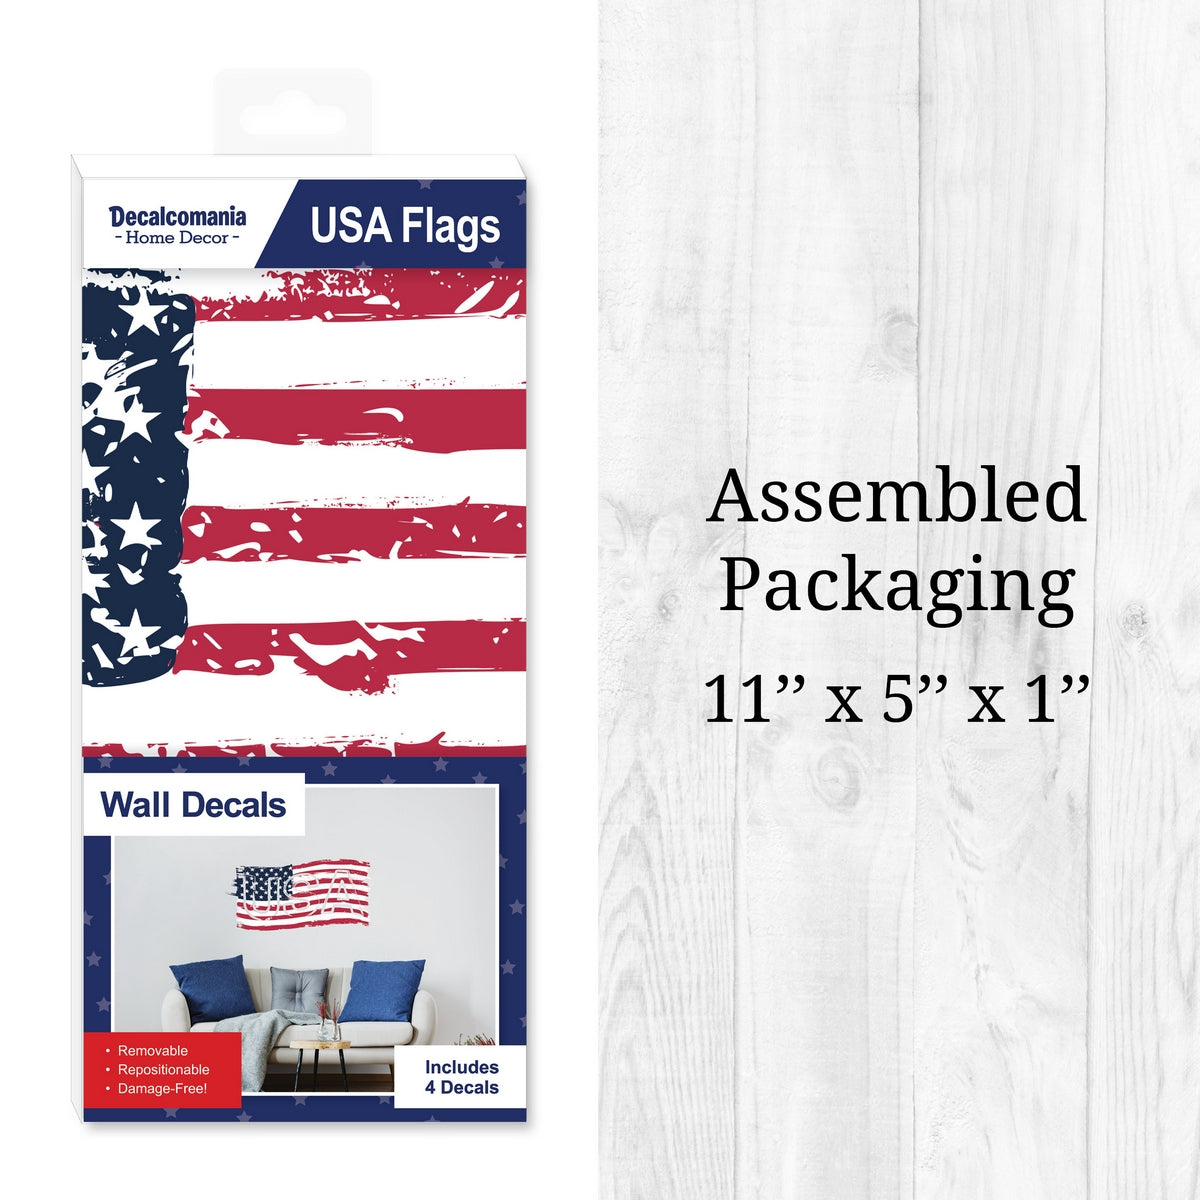 USA Flags Wall Decals